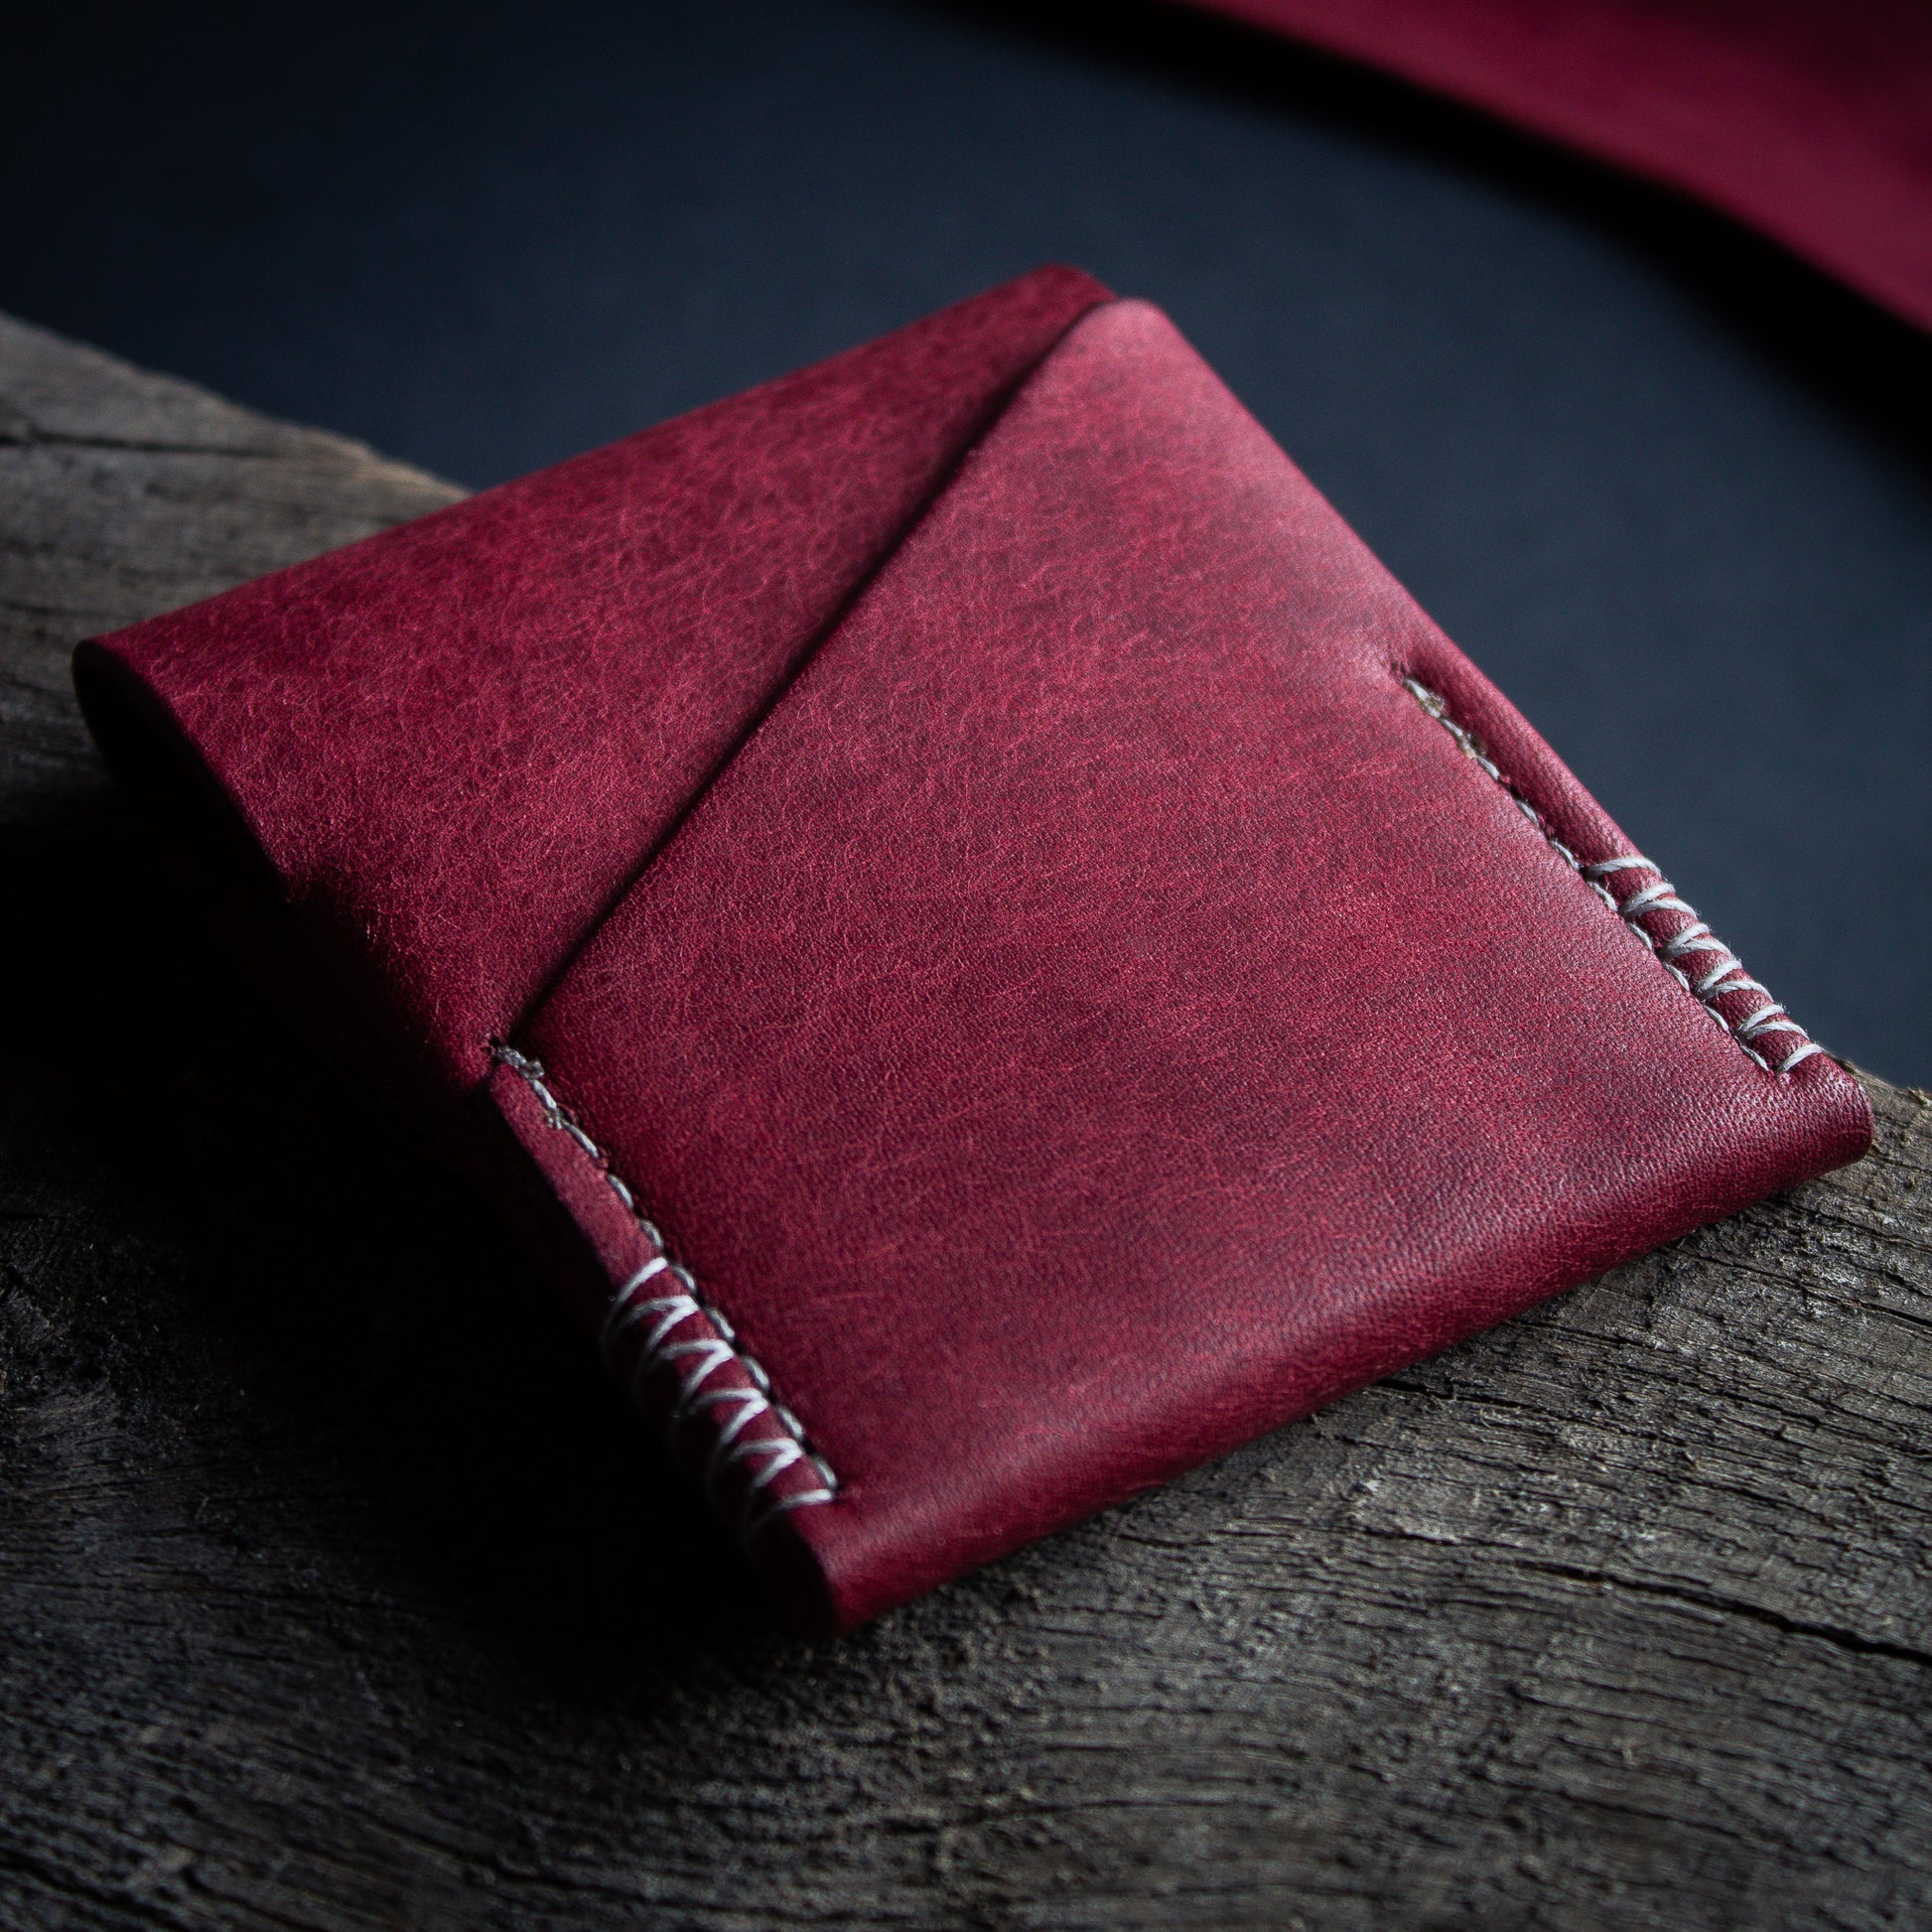 Elkwood Leather - The Blackthorn - EDC Flap full grain Italian Pueblo leather cardholder wallet closed in red Mosto Pueblo leather back quick access slot